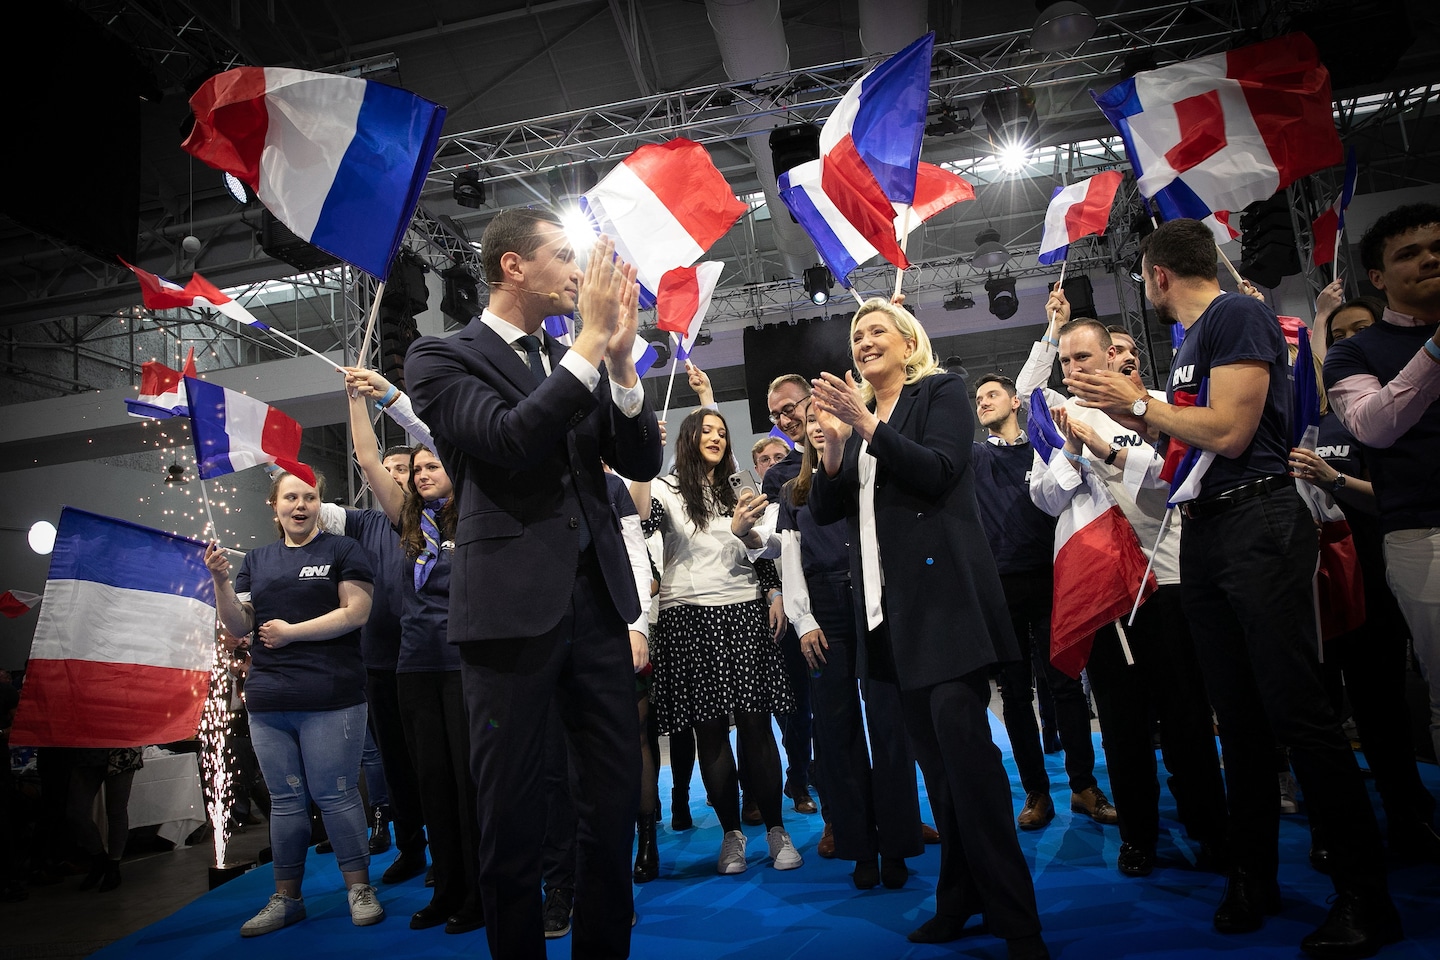 Le Pen reinvented France’s far right. Racism and antisemitism persist.